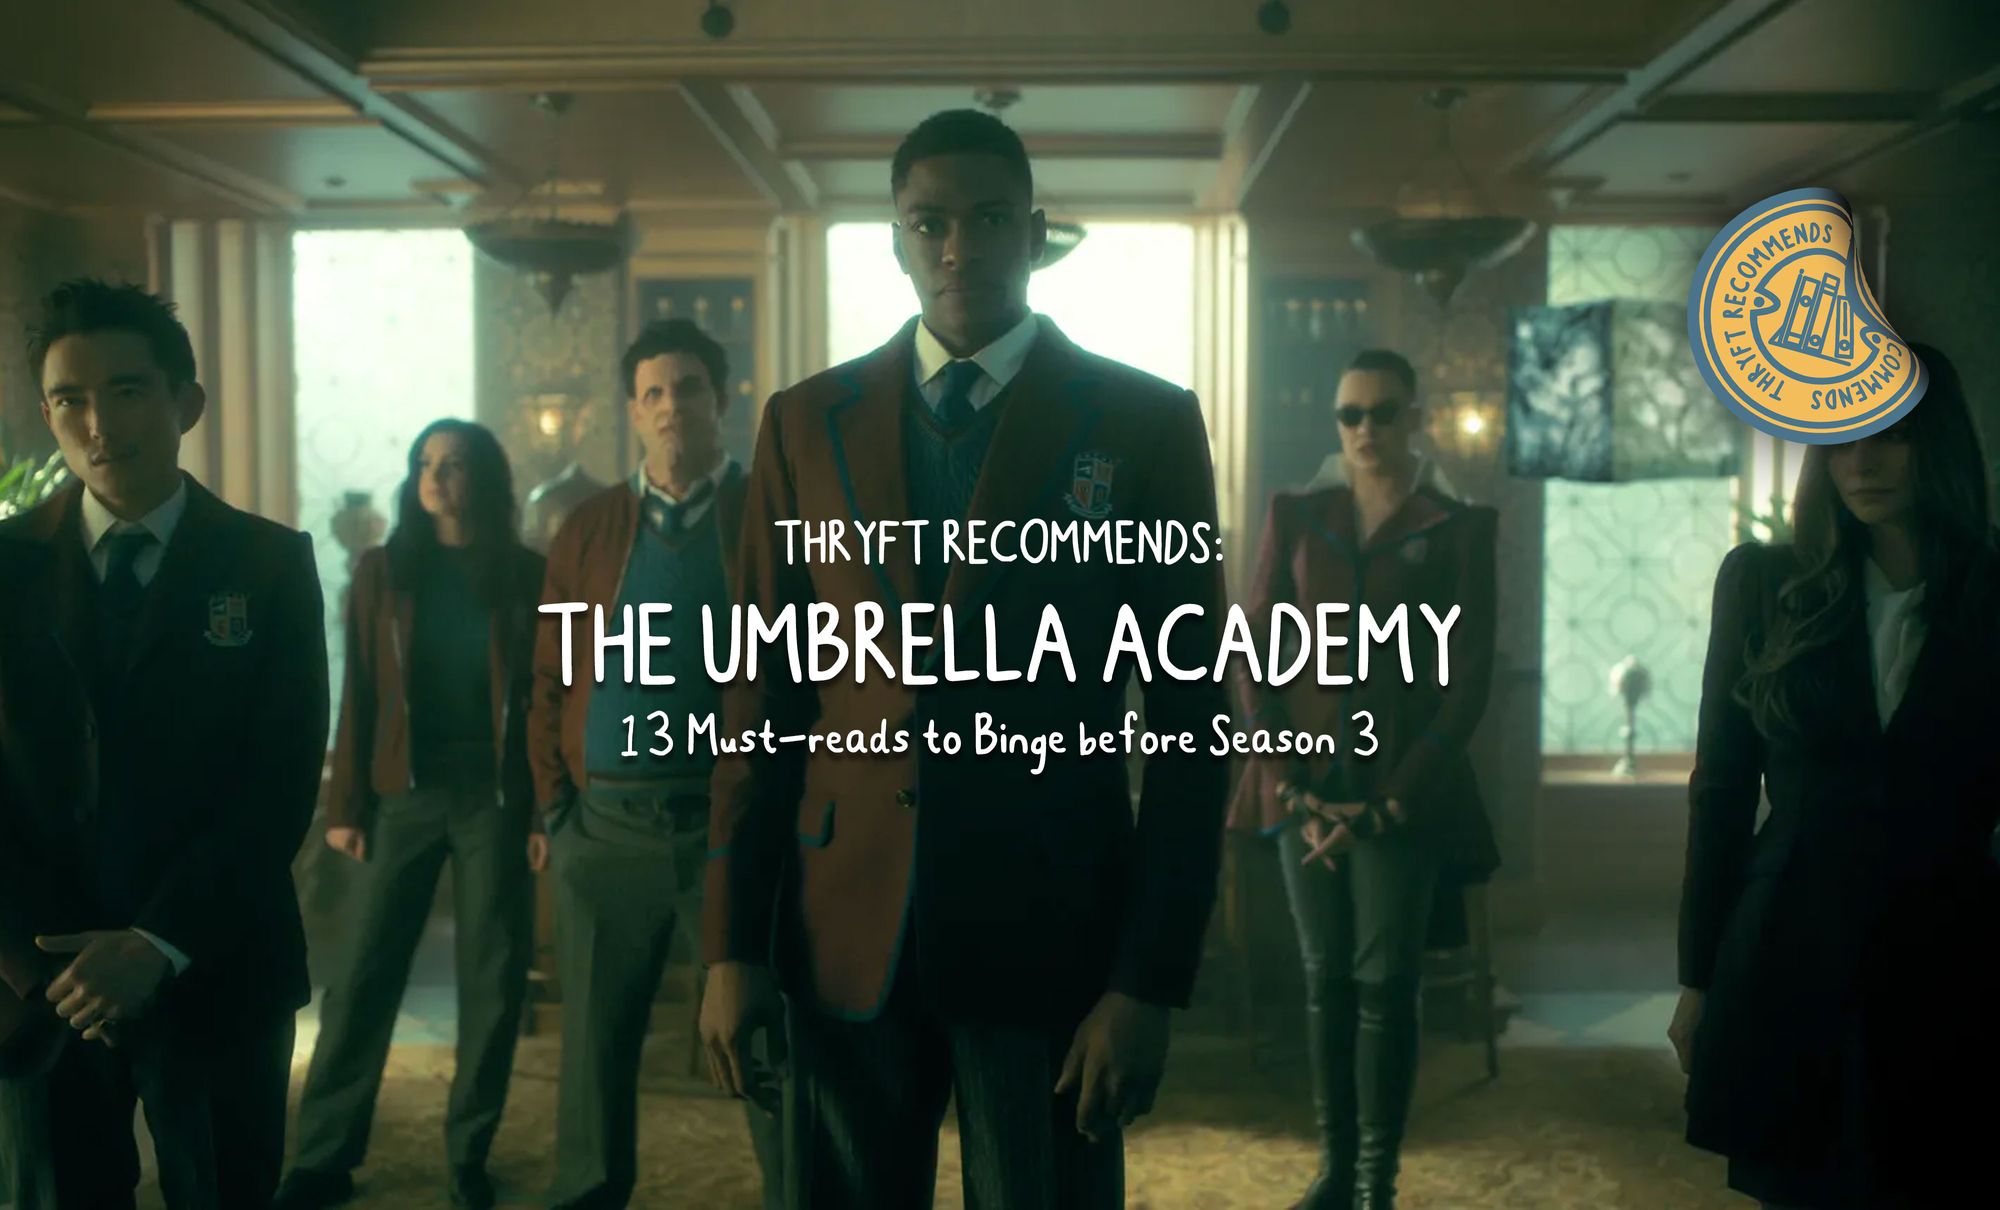 13 Must-reads to Binge before Season 3 of The Umbrella Academy comes out